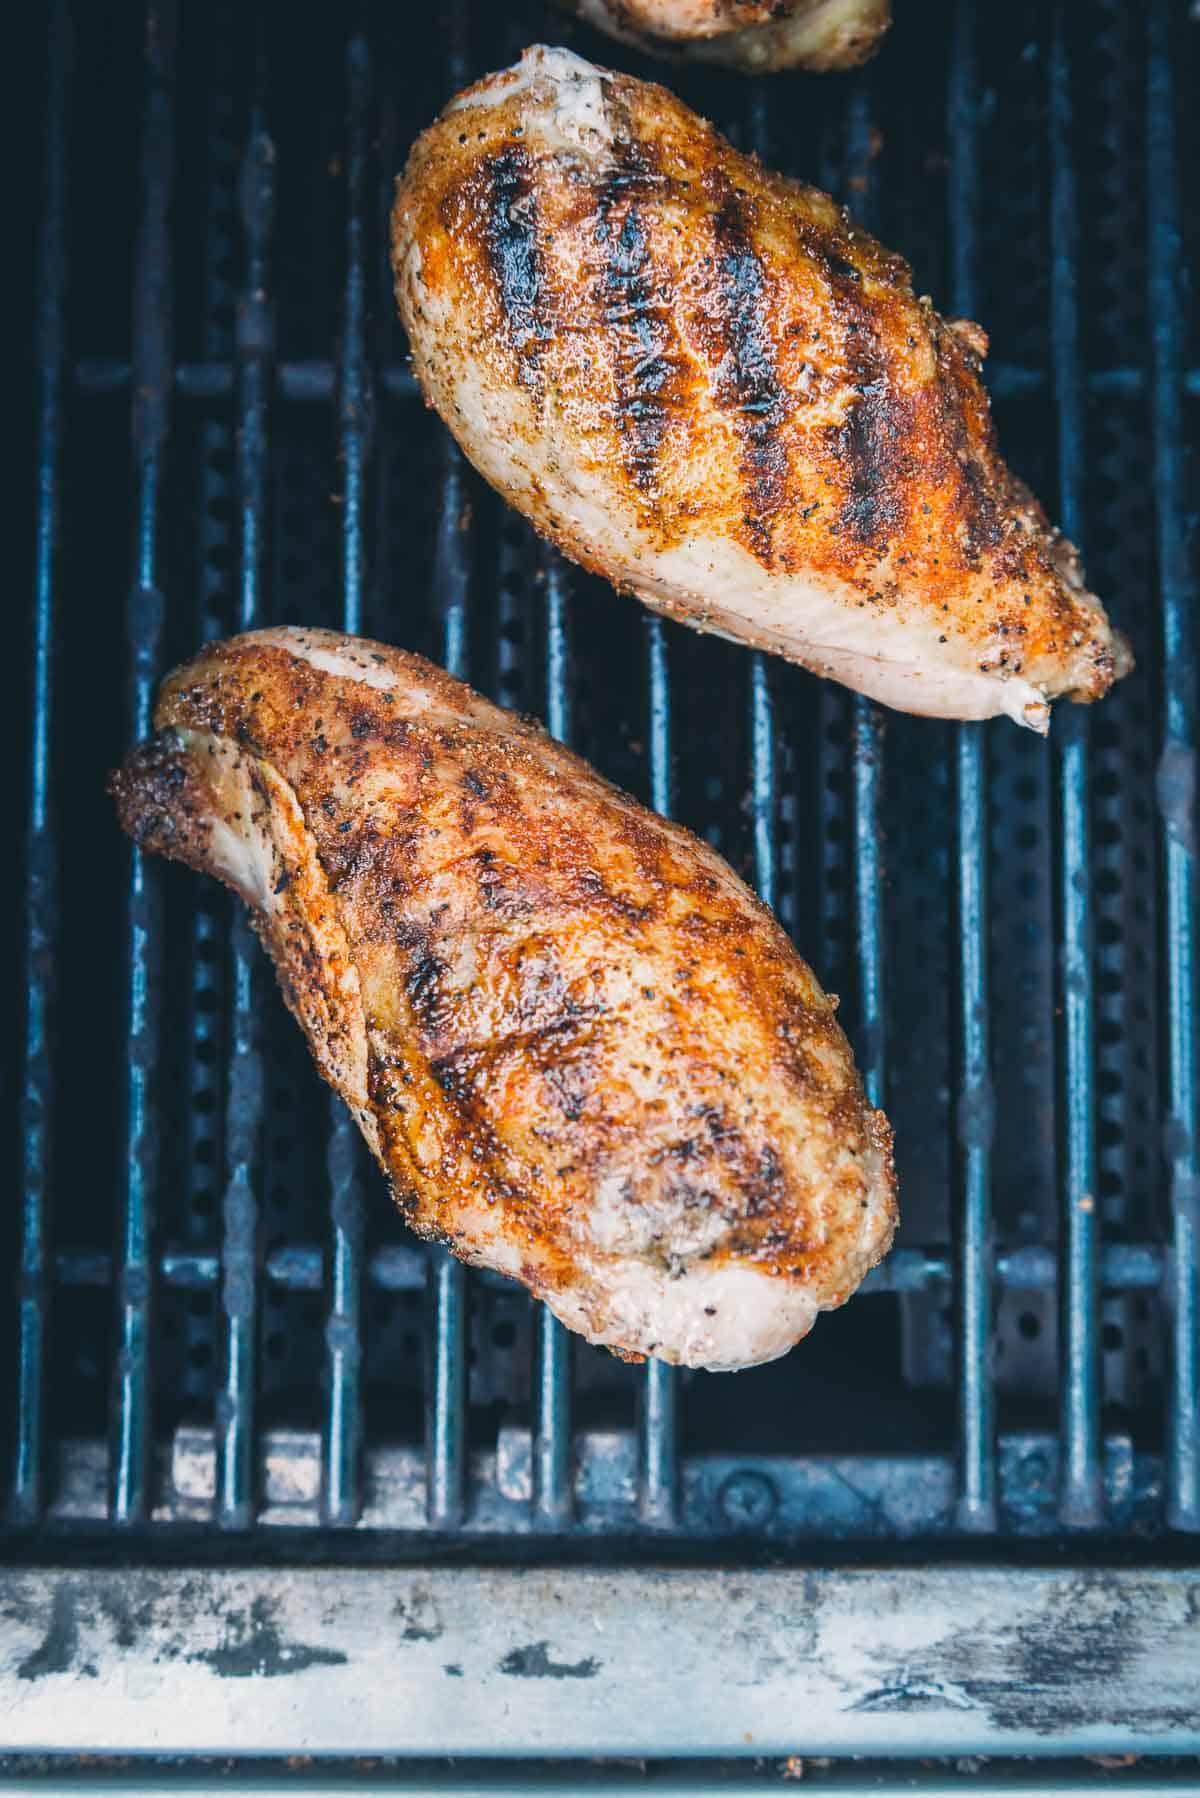 Chicken breast on grill grates, showing grill marks.